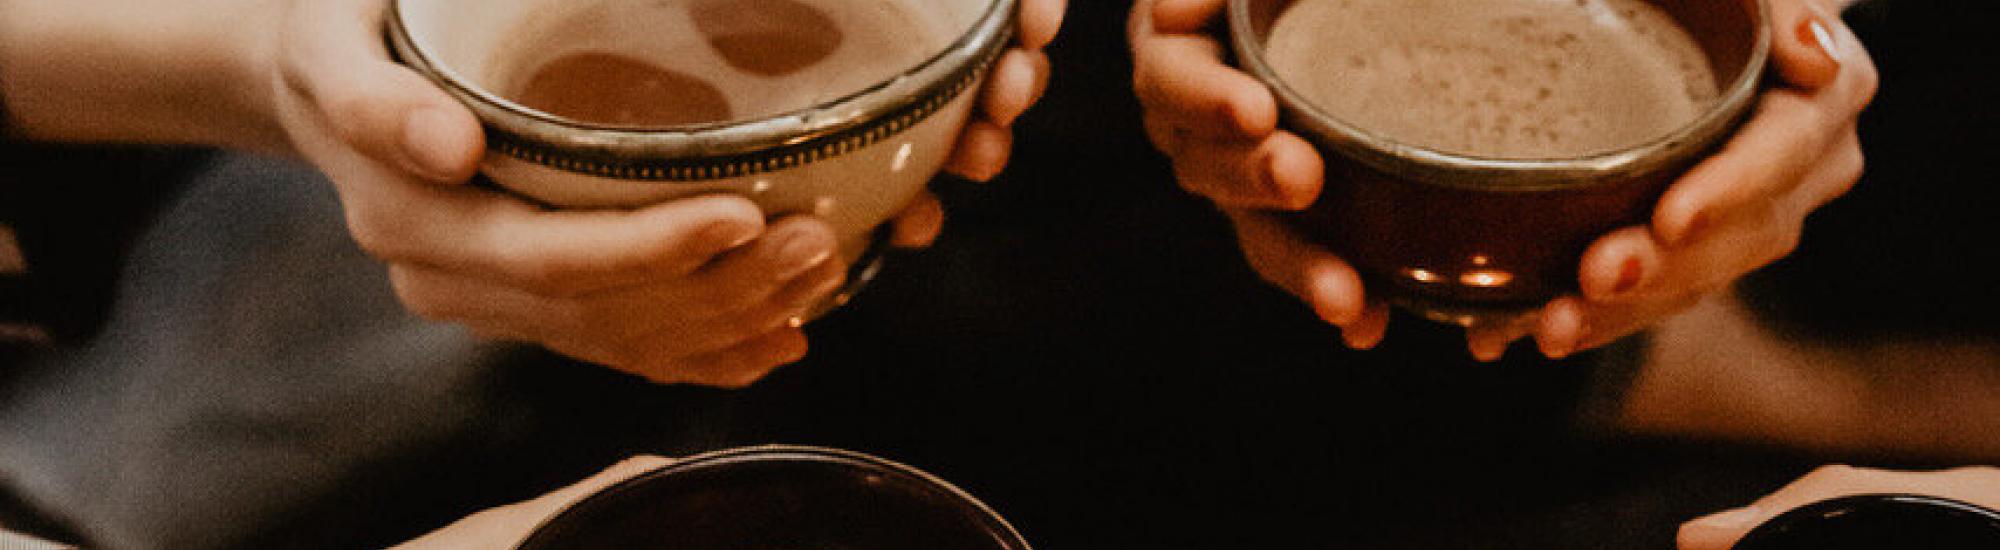 hands holding mugs of cacao